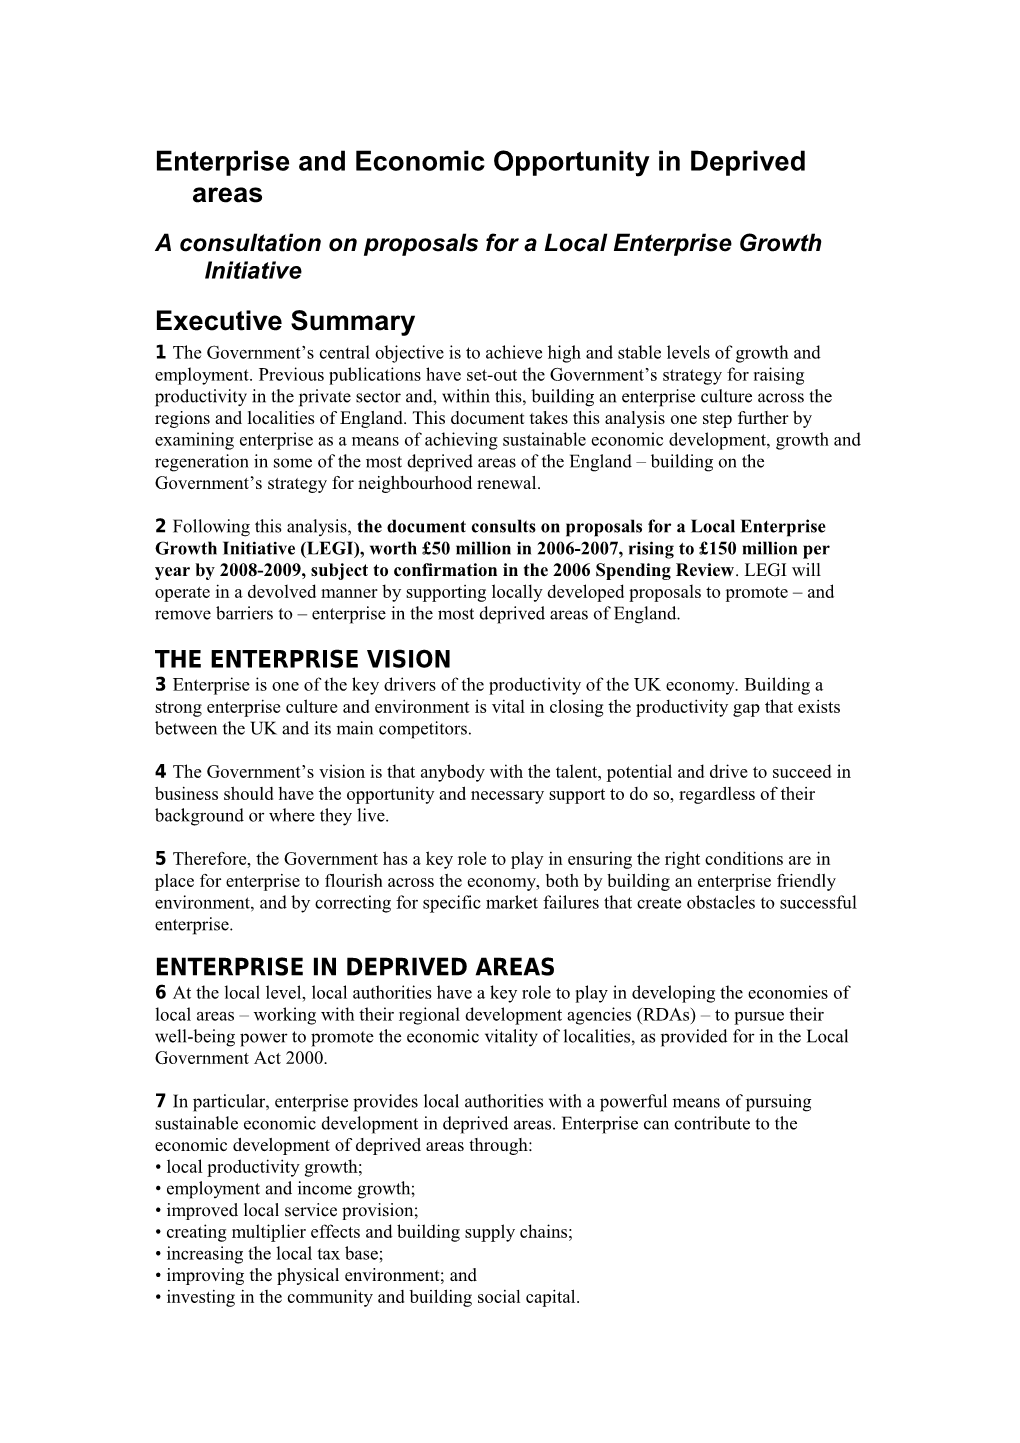 Enterprise and Economic Opportunity in Deprived Areas